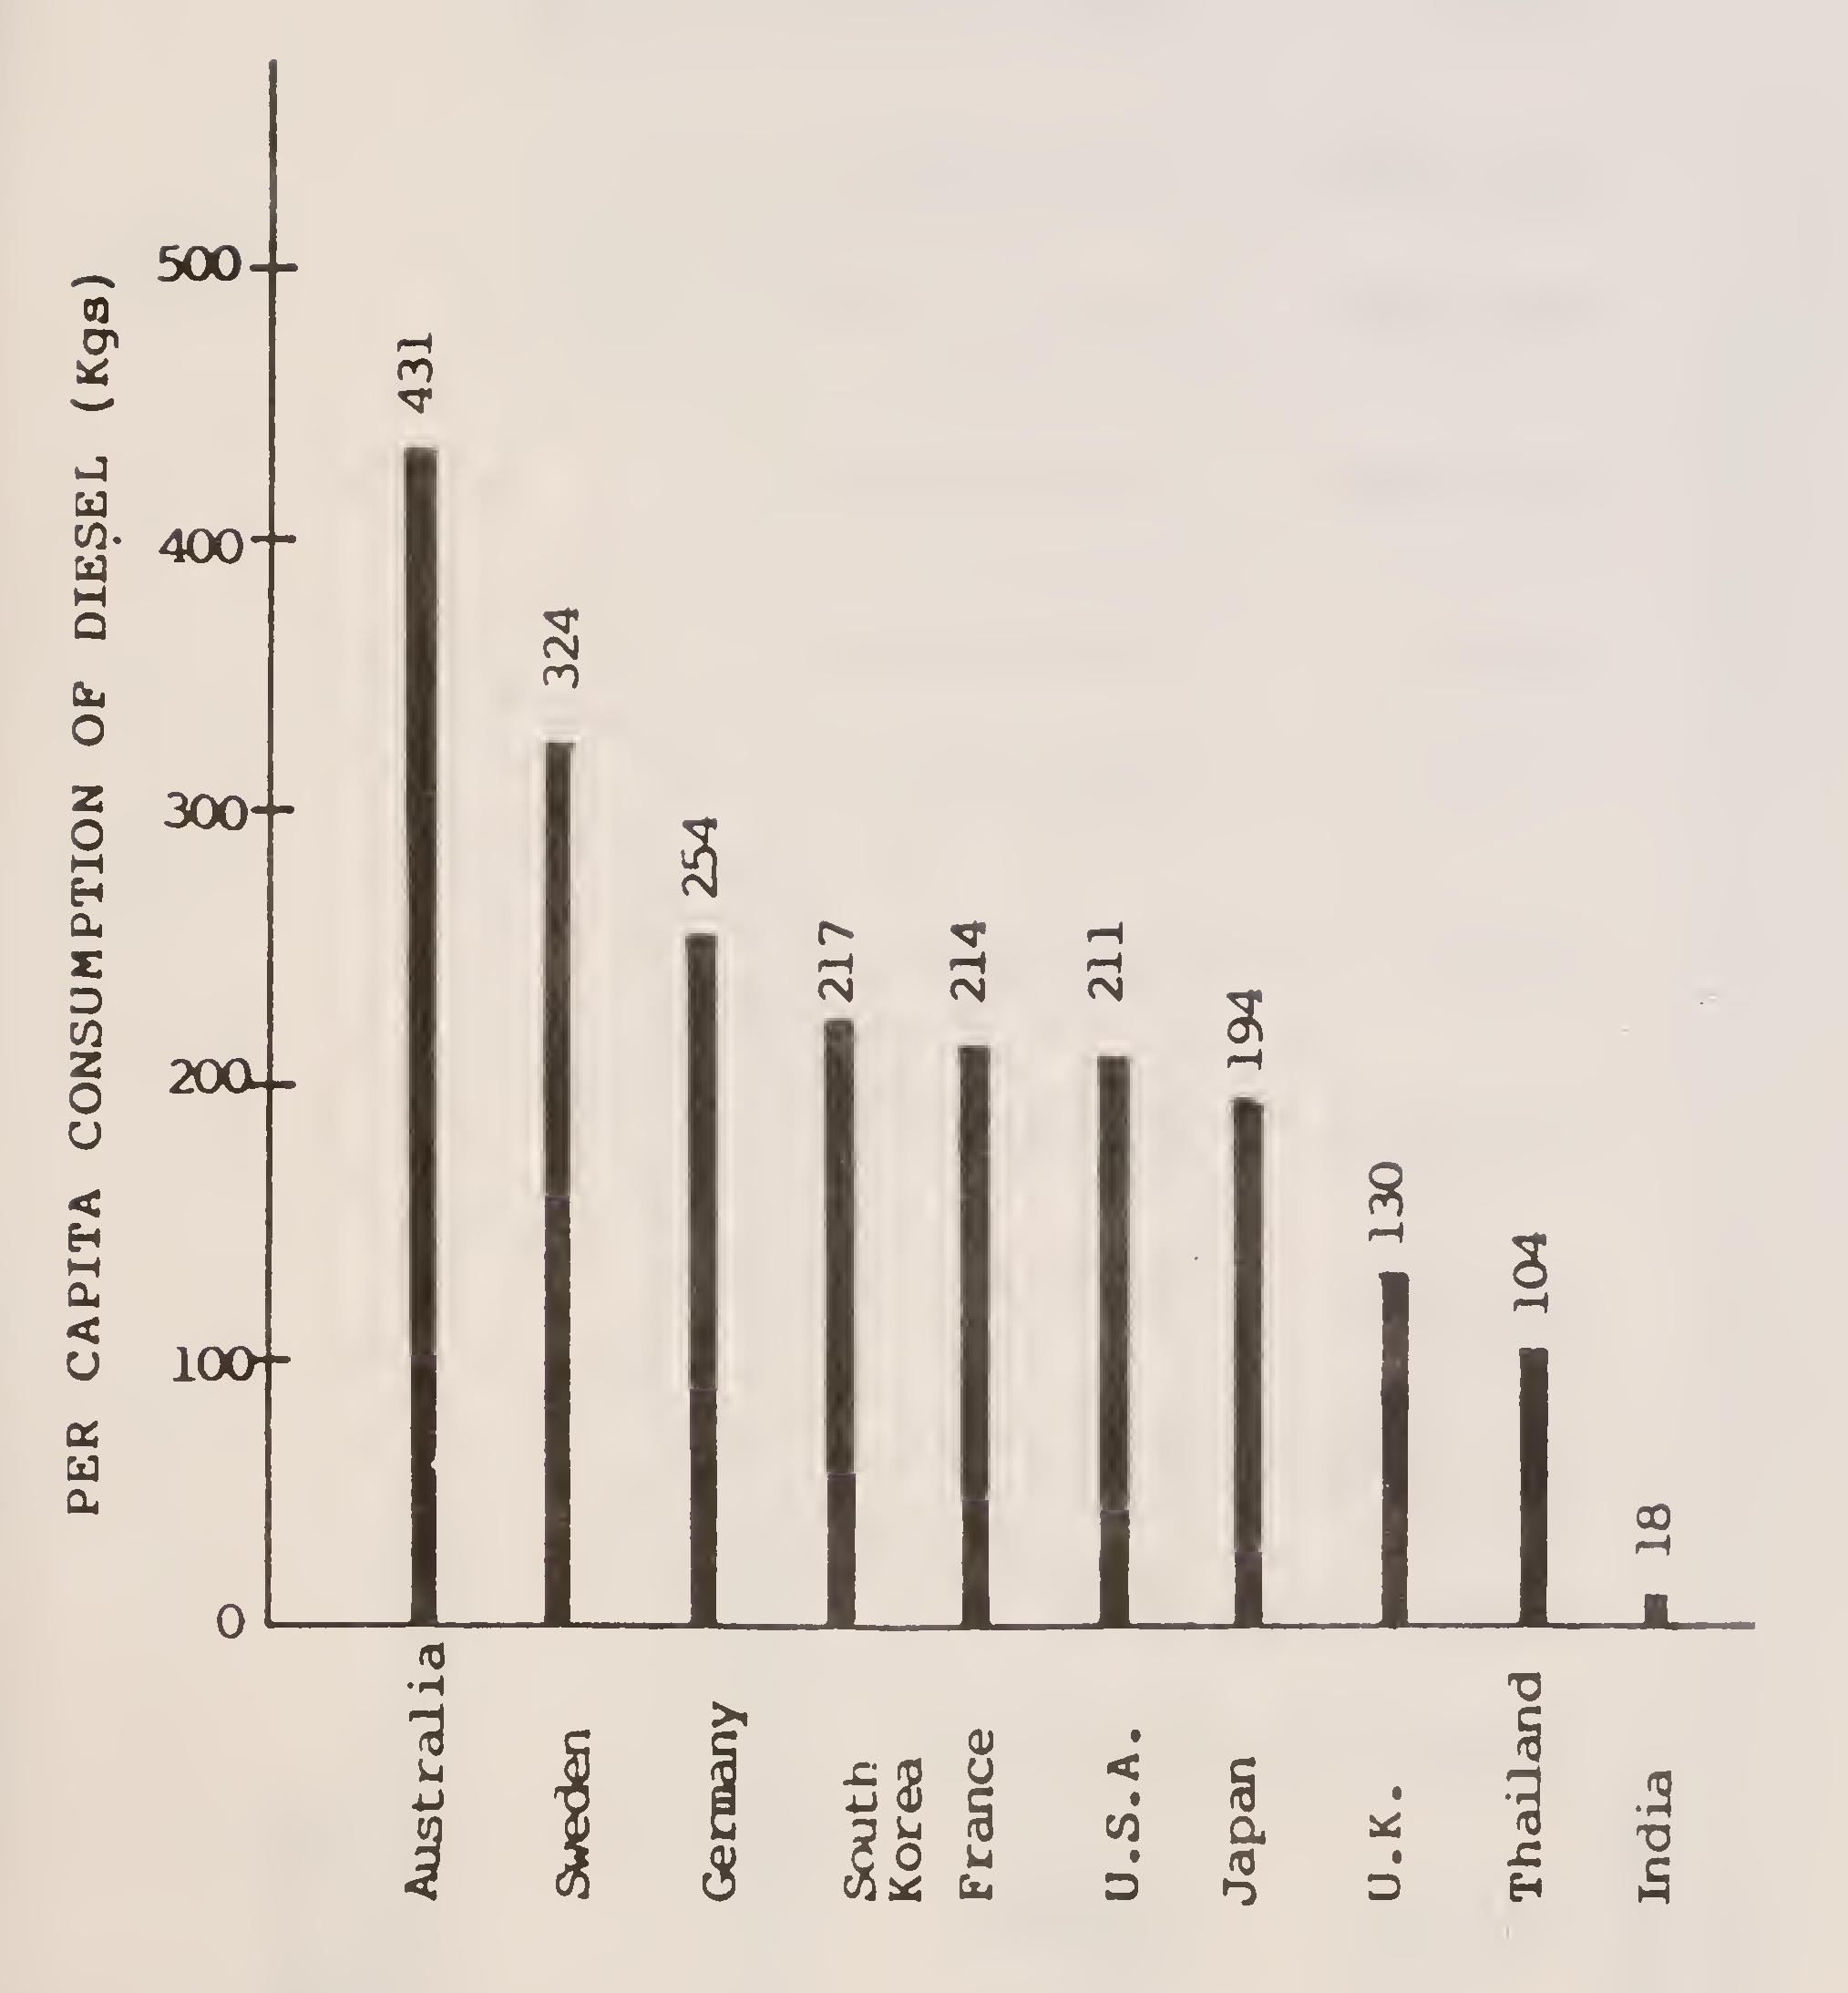 Fig. 10. Per capita consumption of diesel in selected countries